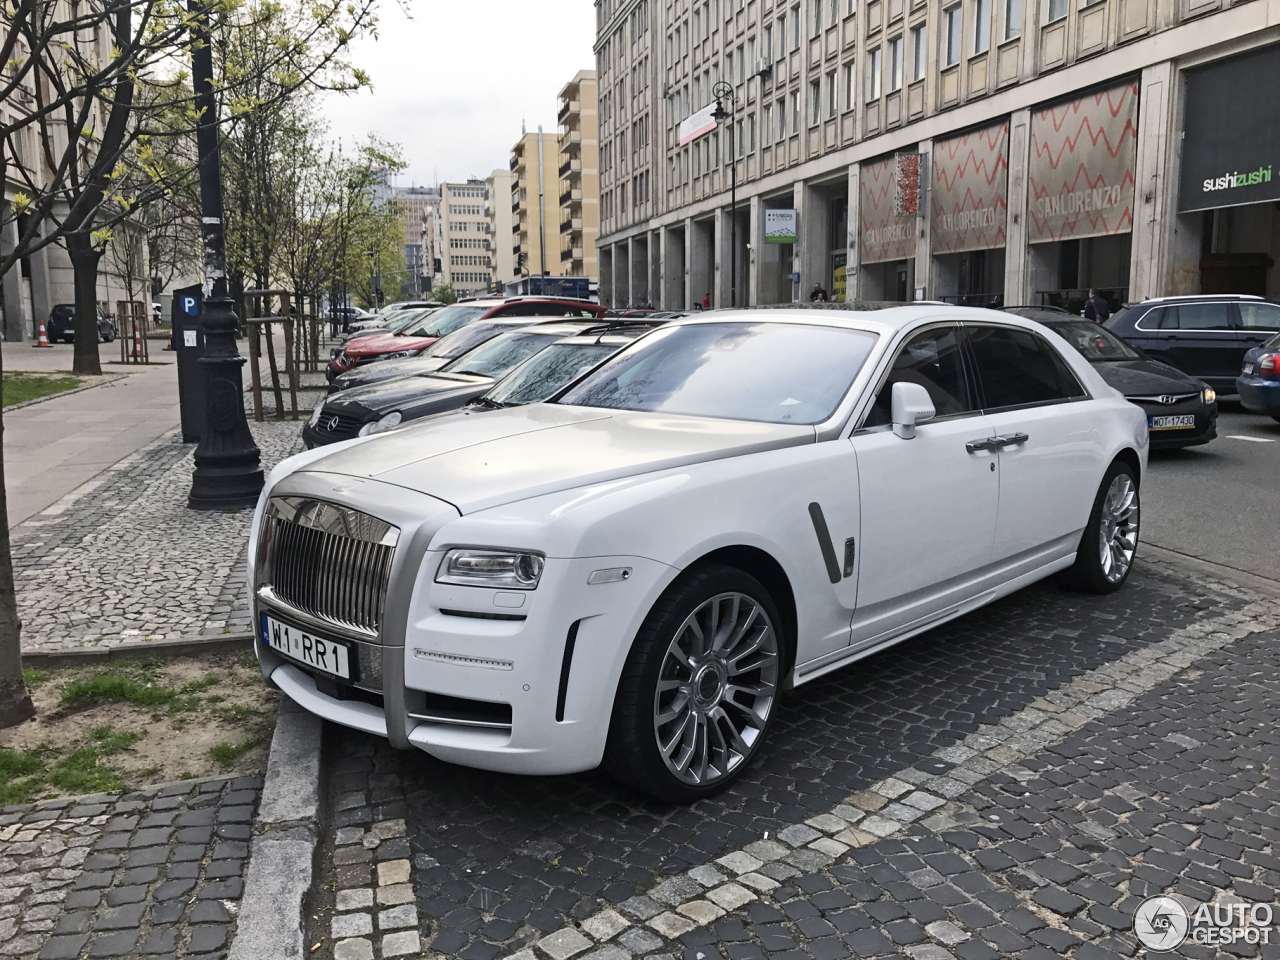 2010 Rolls-Royce Ghost Mansory White Ghost Limited